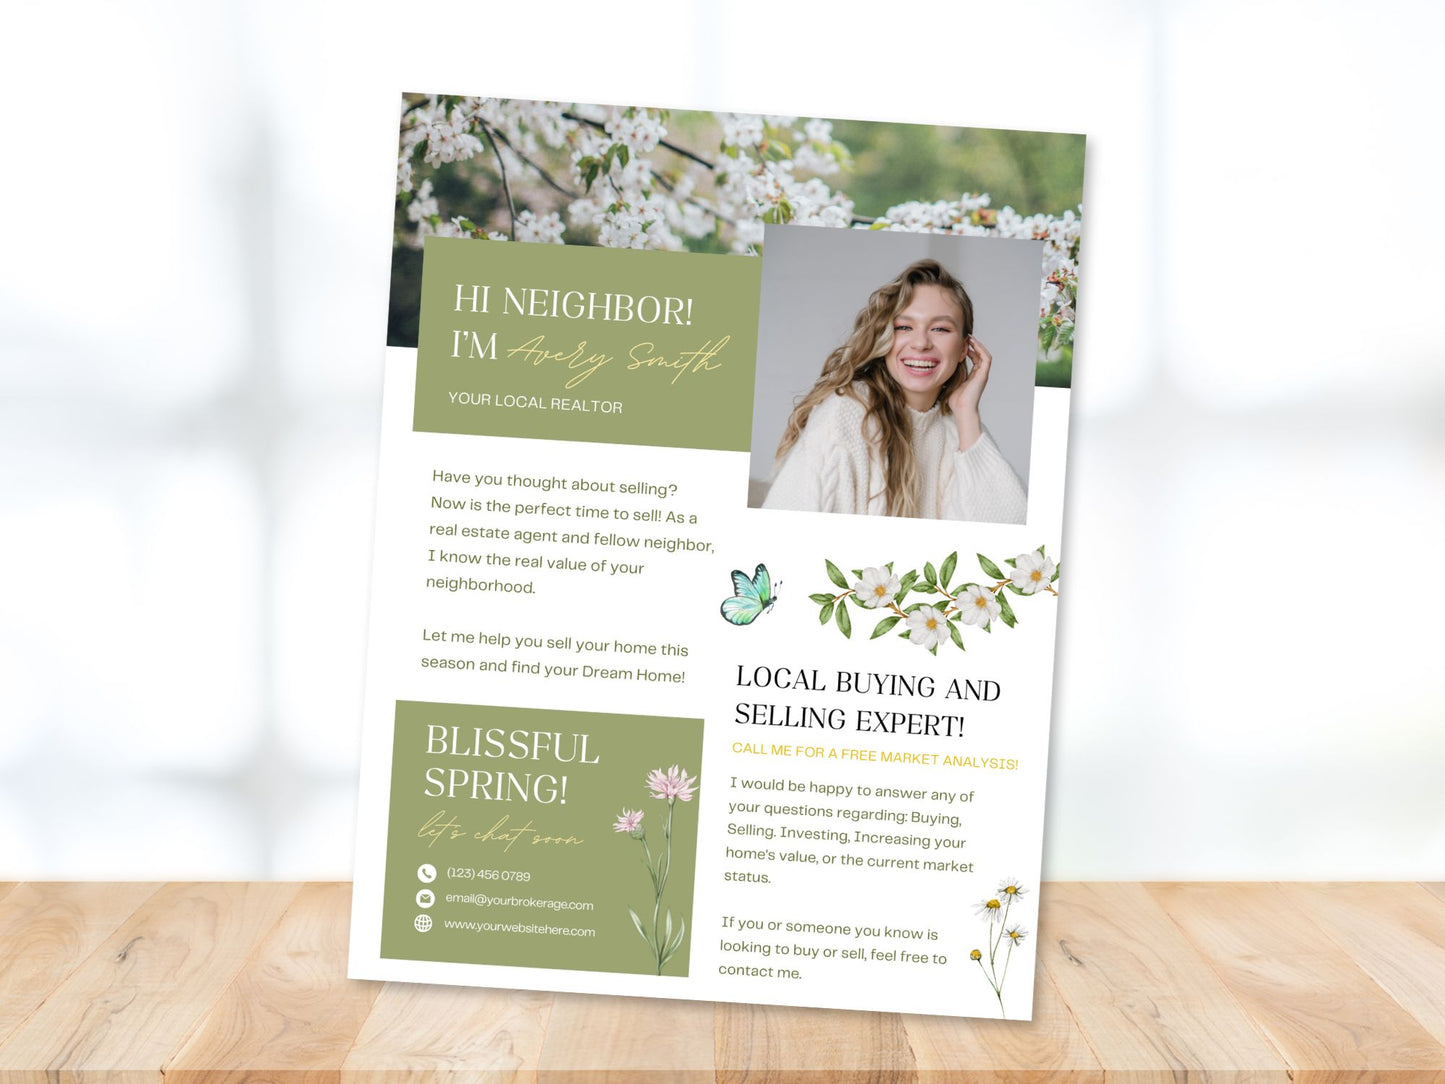 Spring Hello Neighbor Flyer - Professionally designed real estate flyer welcoming the season and showcasing property listings.